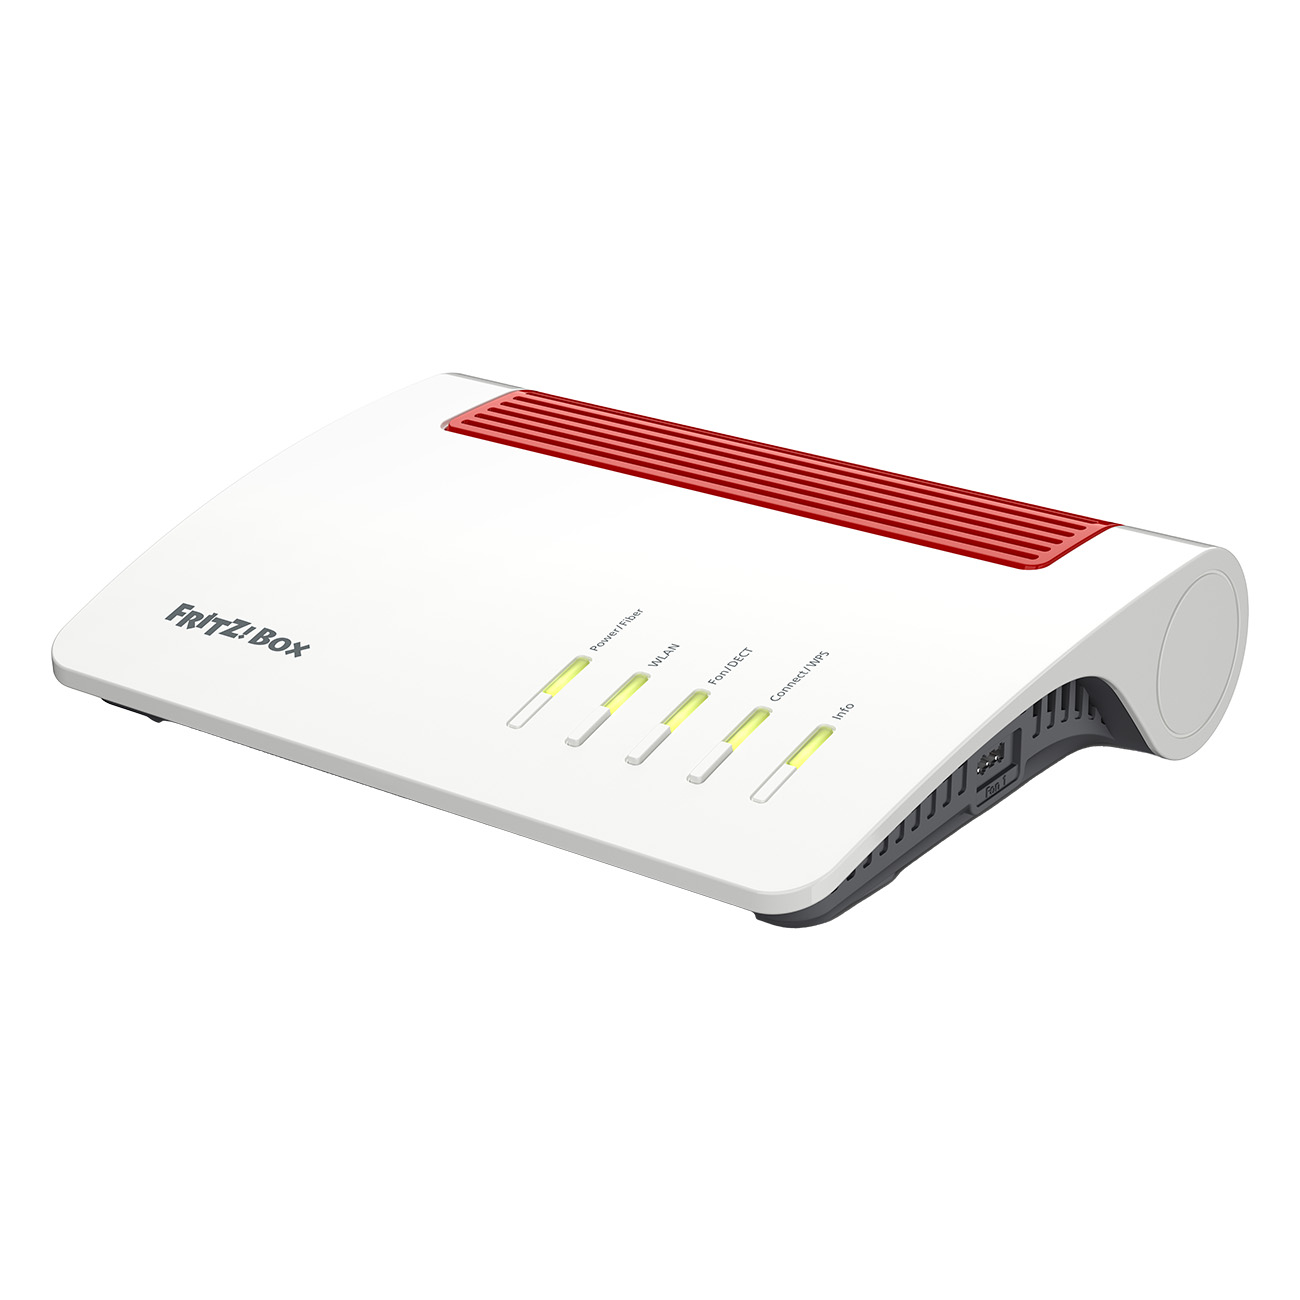 AVM FRITZ!Box 5590 Fiber Wei? / Rot | Wi-Fi 6 Glasfaser Router | Maximale Datenrate (2,4 GHz): 1200 Mbit/s | Maximale Datenrate (5 GHz): 2400 Mbit/s von AVM